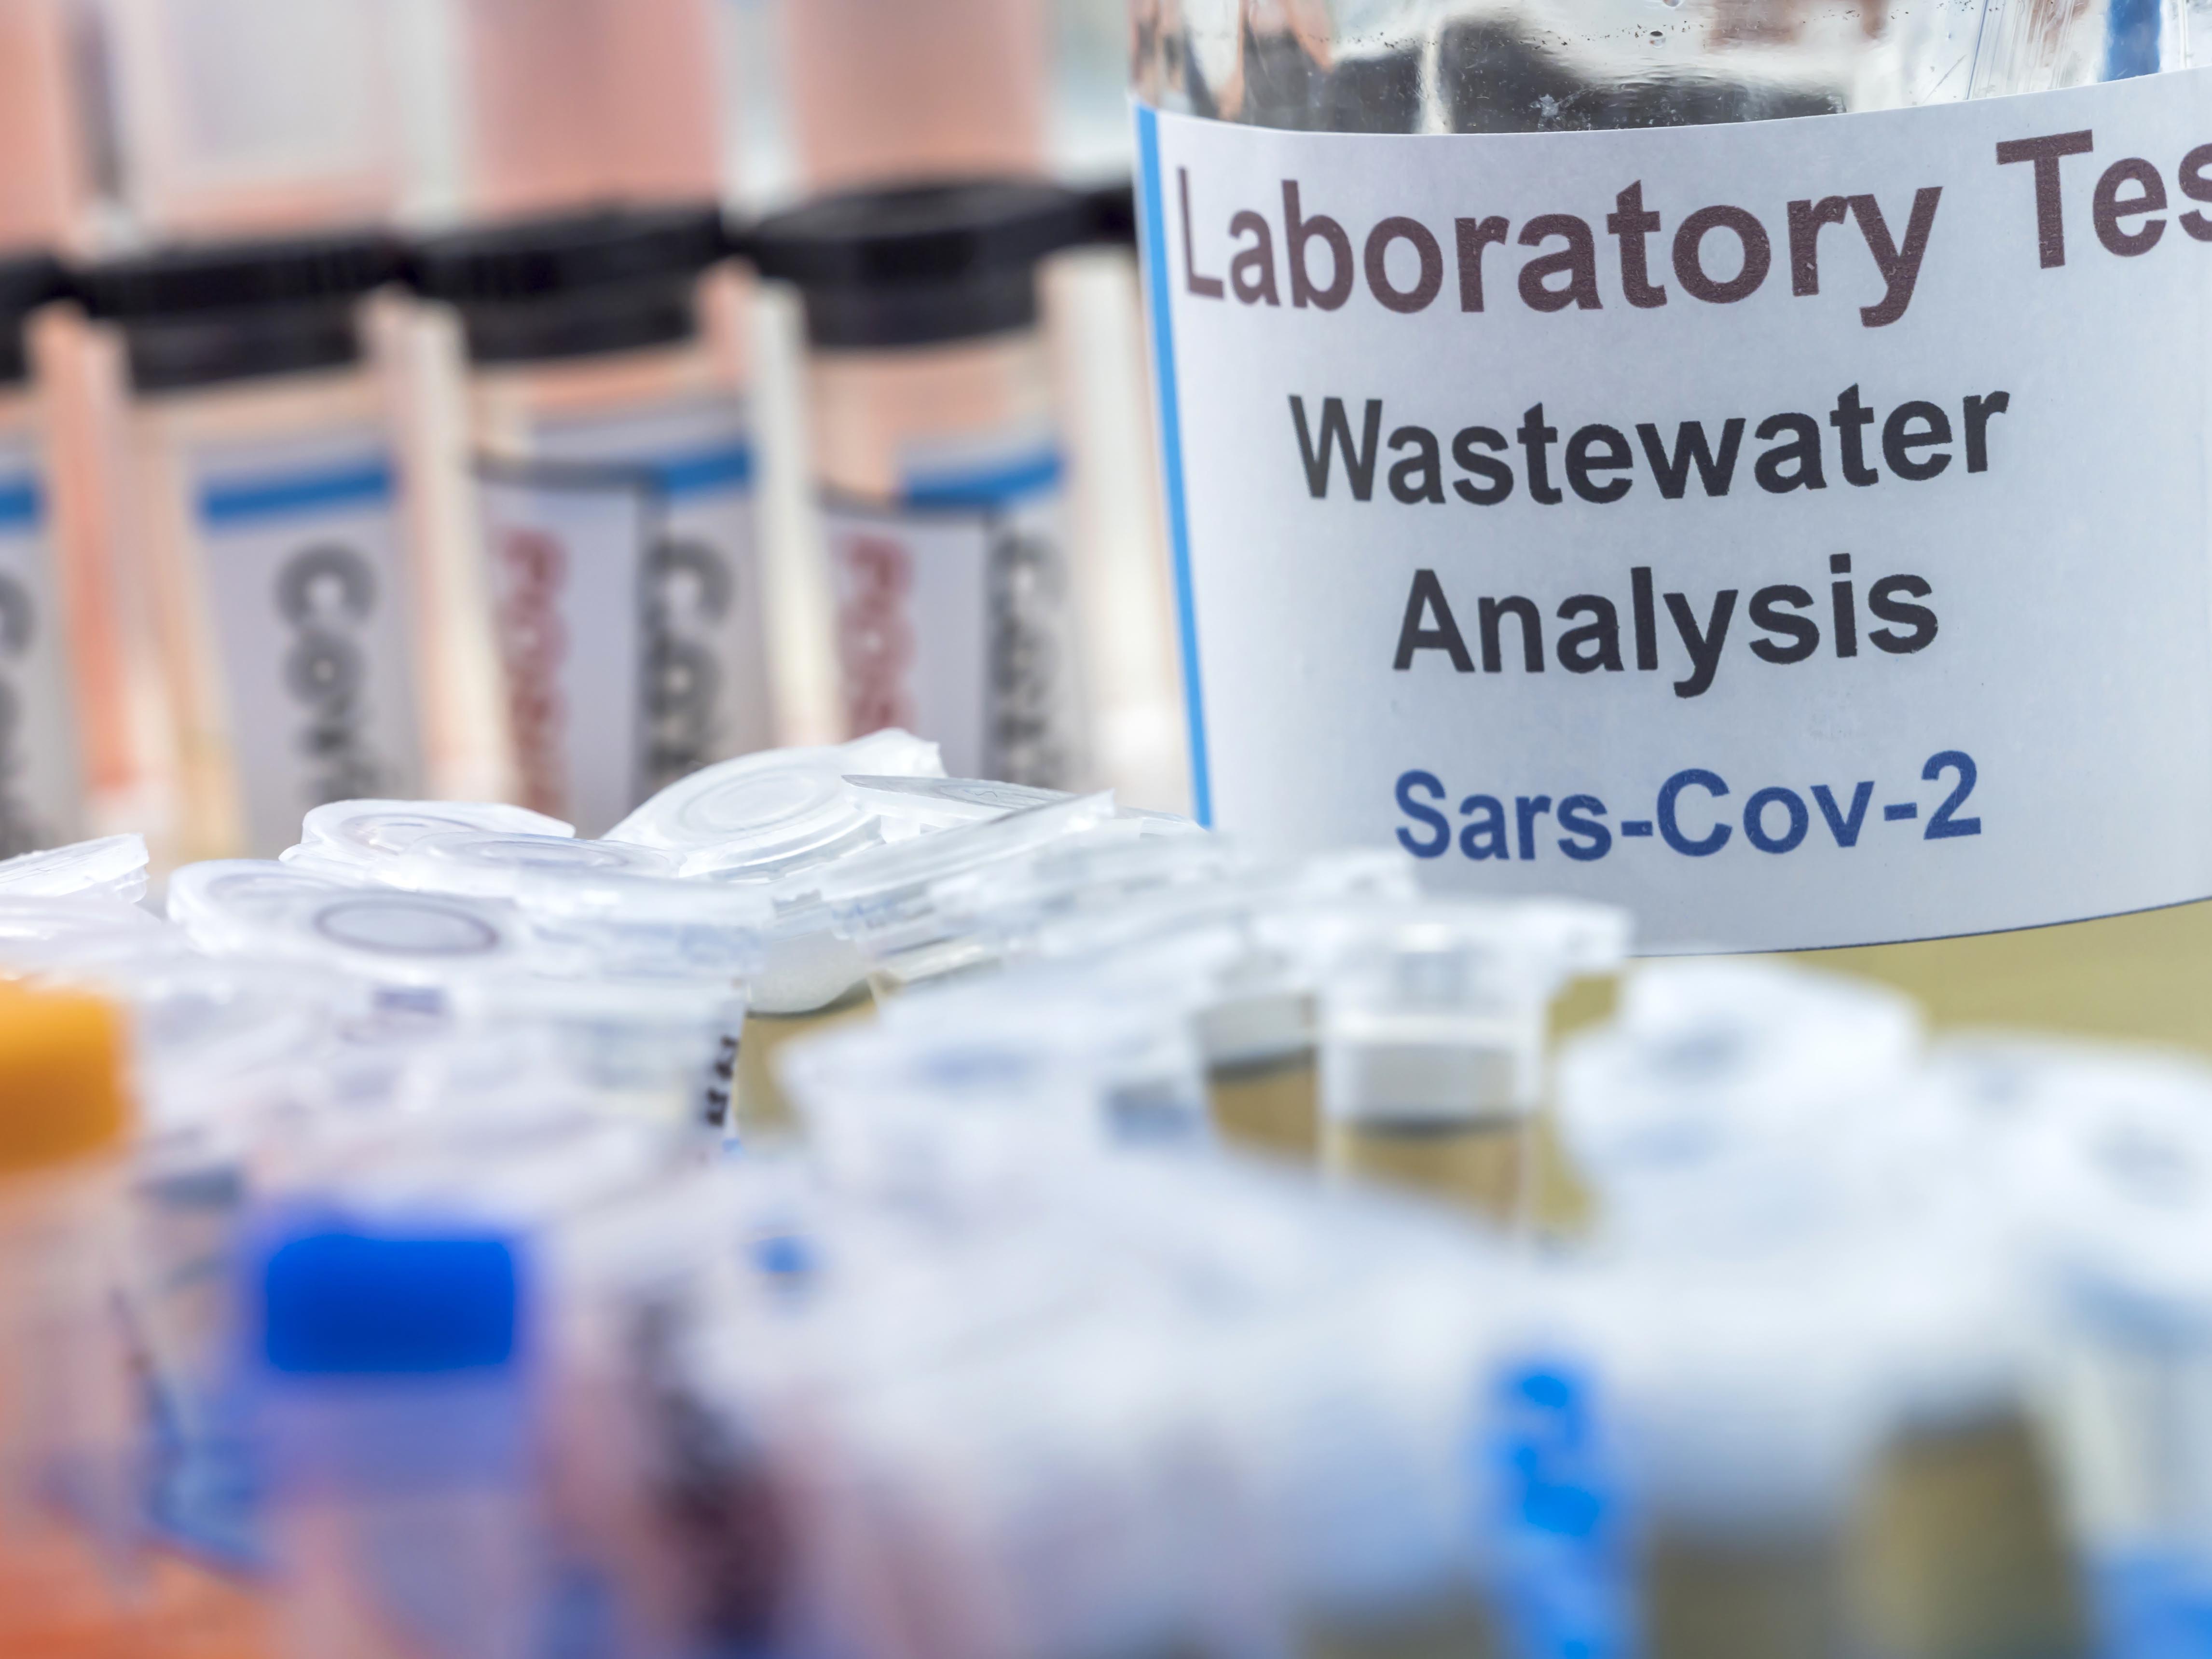 Small bottle of wastewater with label stating "Laboratory test, wastewater analysis, SARS-Cov-2"